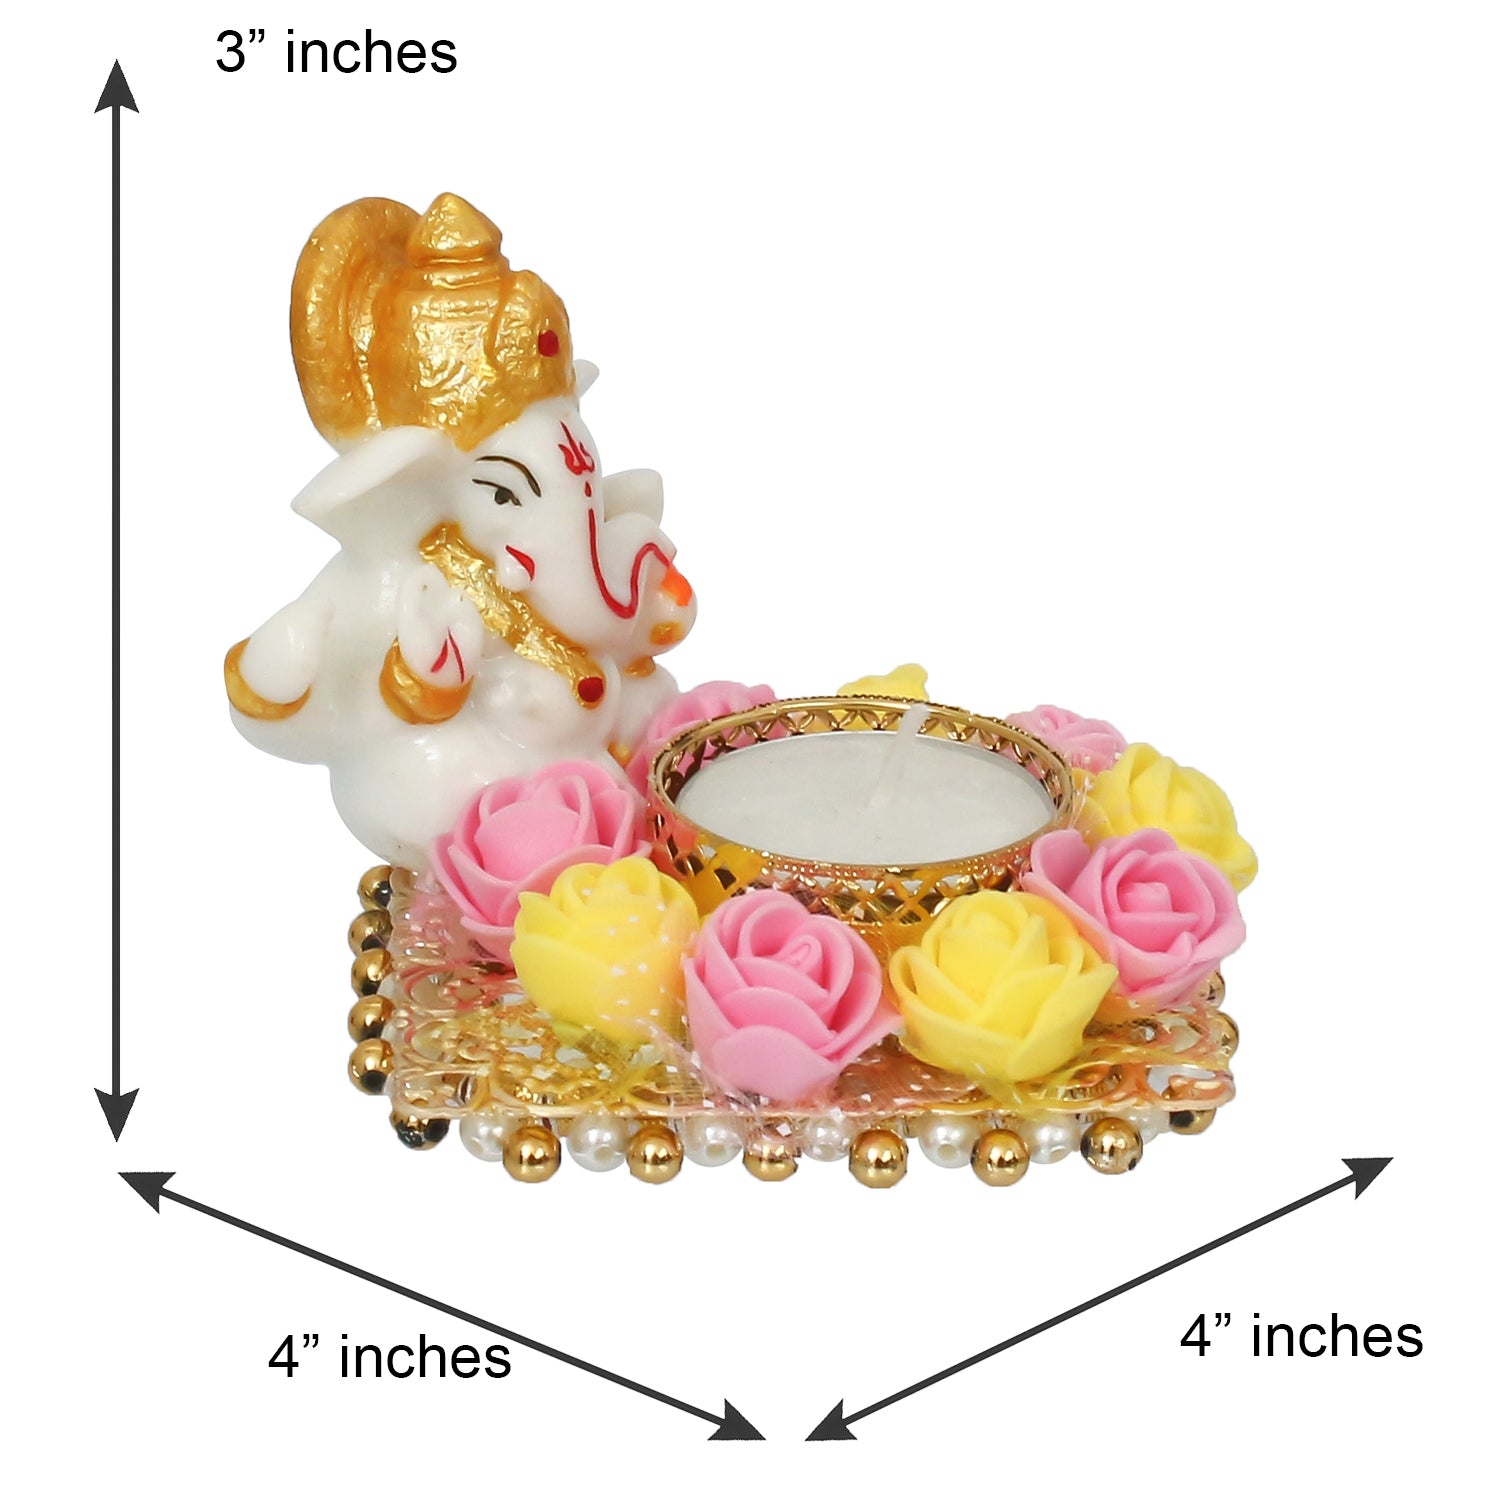 Polyresin Lord Ganesha Idol on Decorative Metal Plate with Tea Light Holder (Pink, Yellow and White) 2